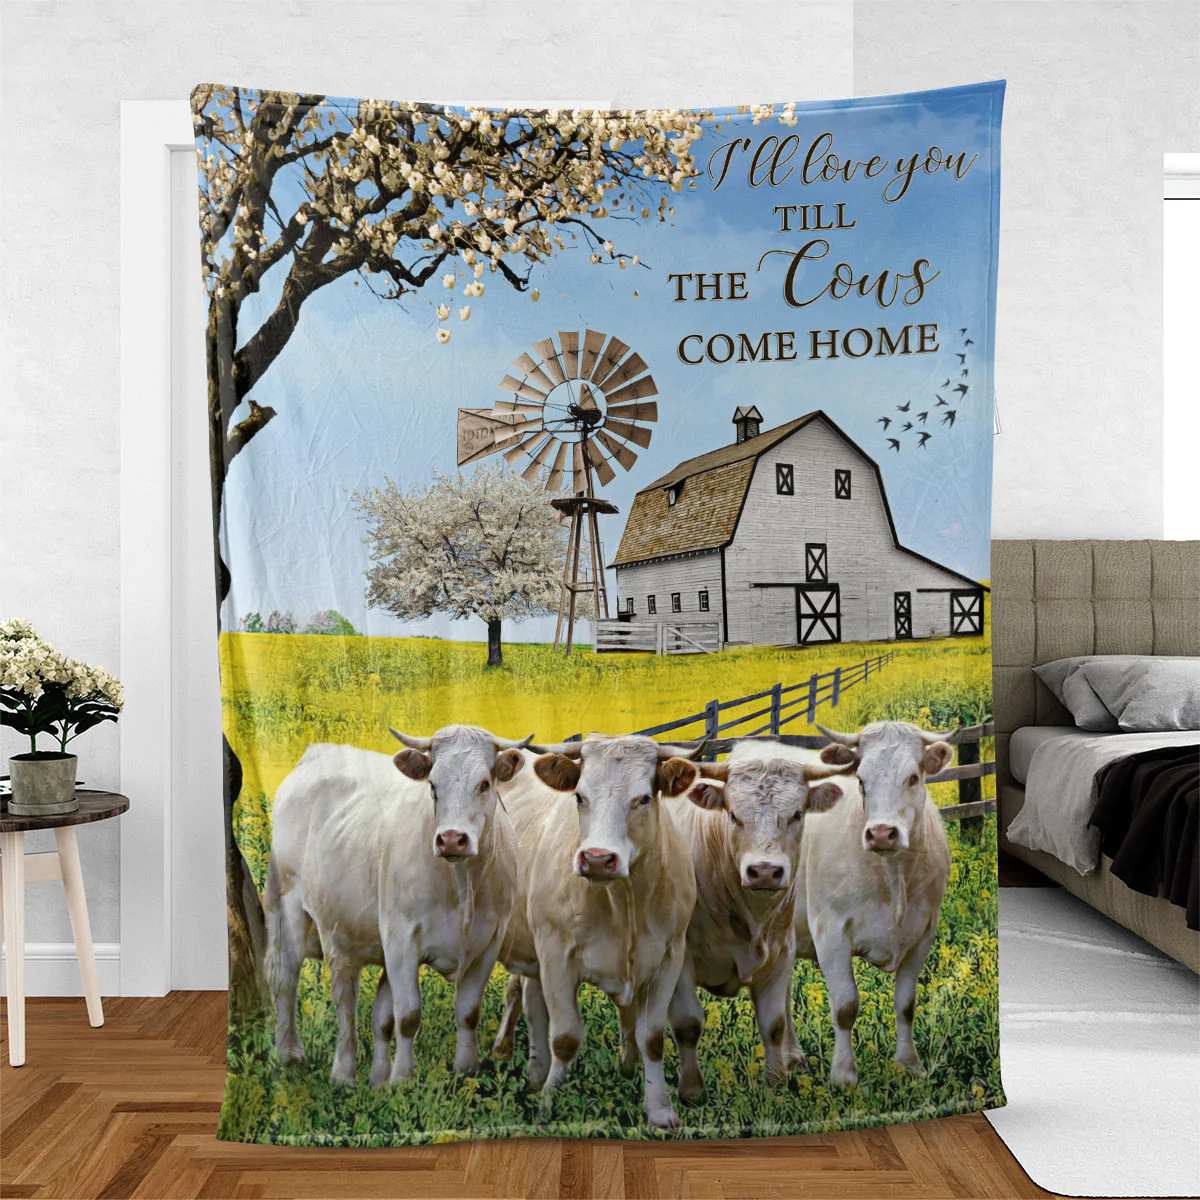 Charolais Cow Blanket/ Love You Till The Cows Come Home Blanket/ Farm Blanket/ Bedding Sofa Decoration For Farm Lover